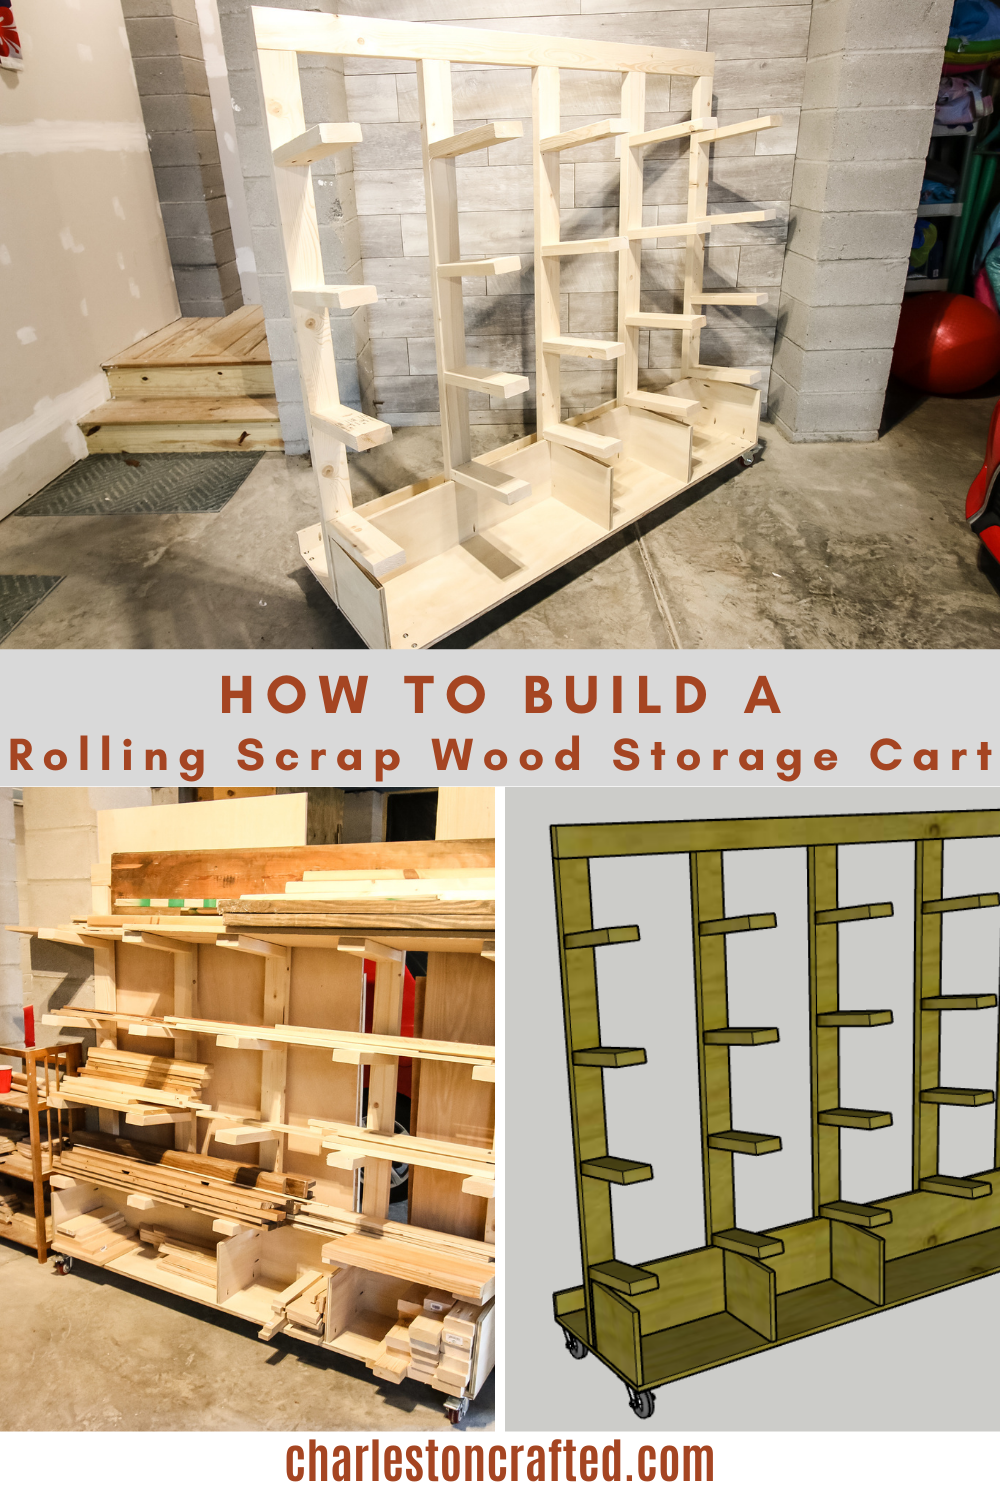 Don't Throw Away Scrap Wood! Here Are 3 Cool Projects You Can Make